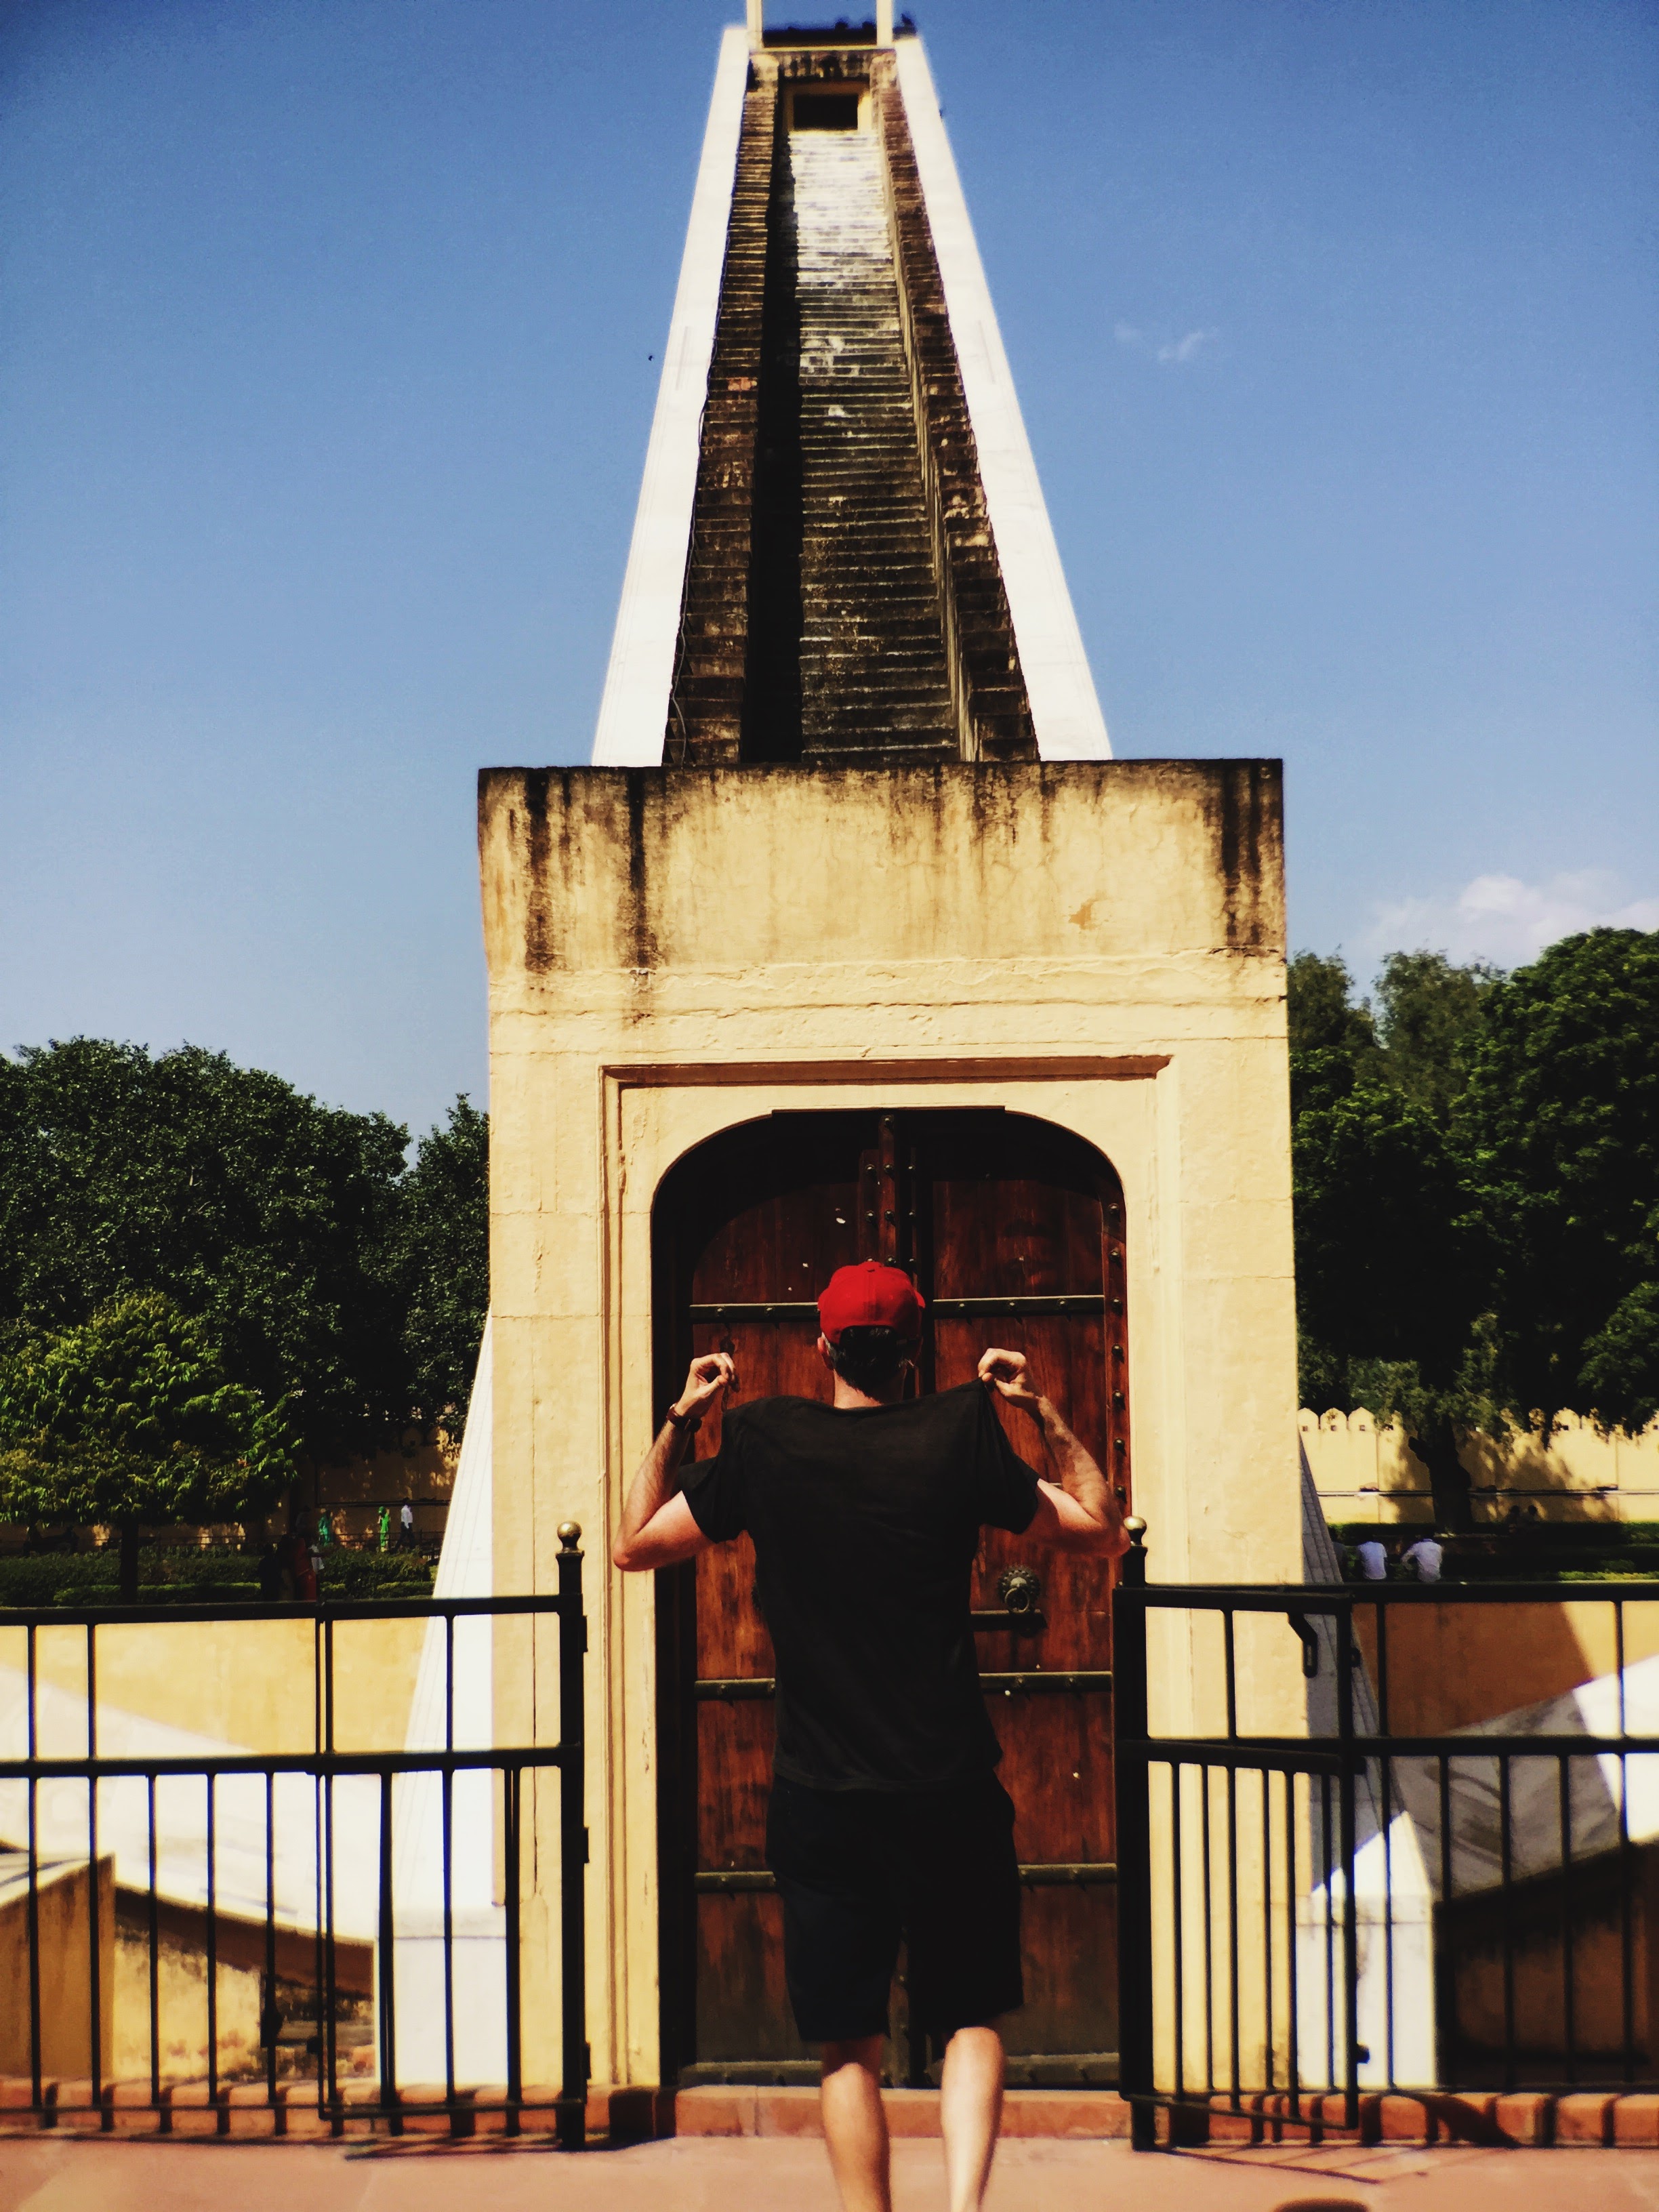 The McHowe World Tour - Part II- Jaipur the Pink City - Jantar Mantar Observatory